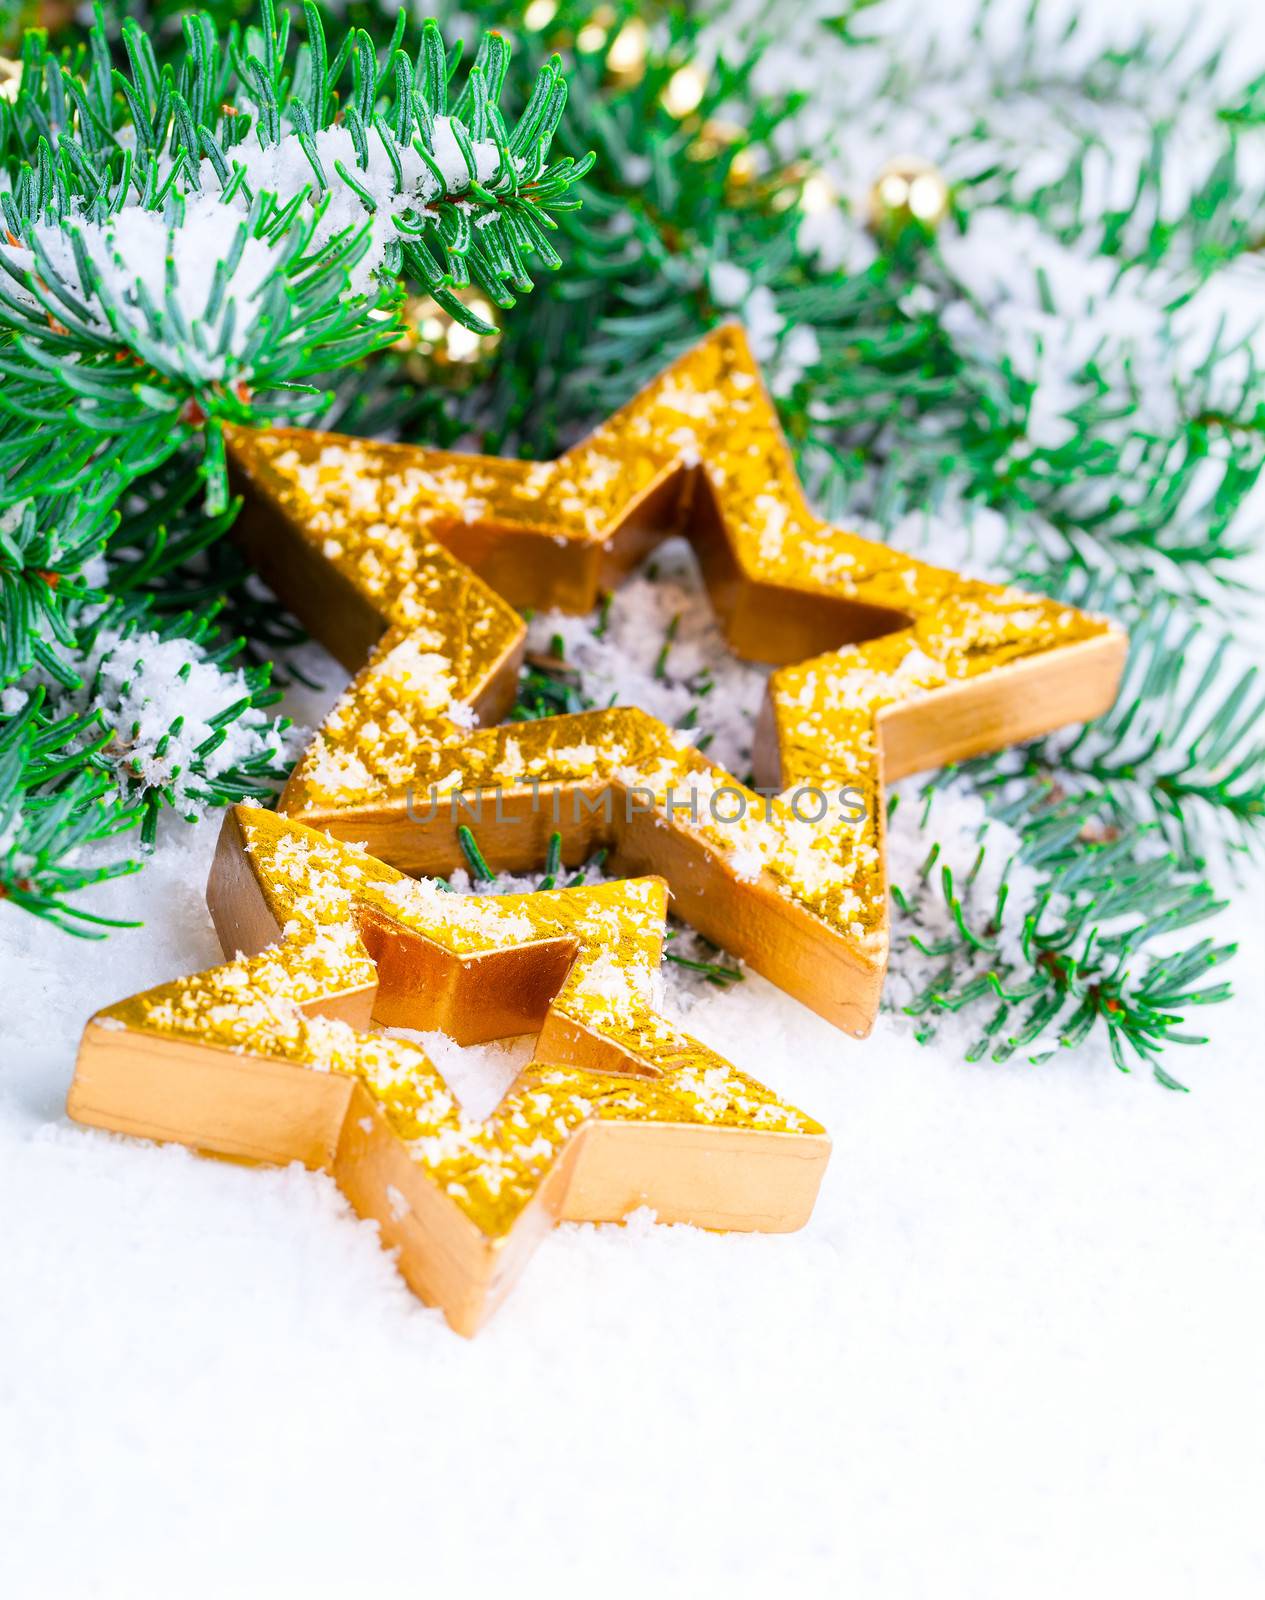 Golden Christmas stars with pine branch and snow by motorolka